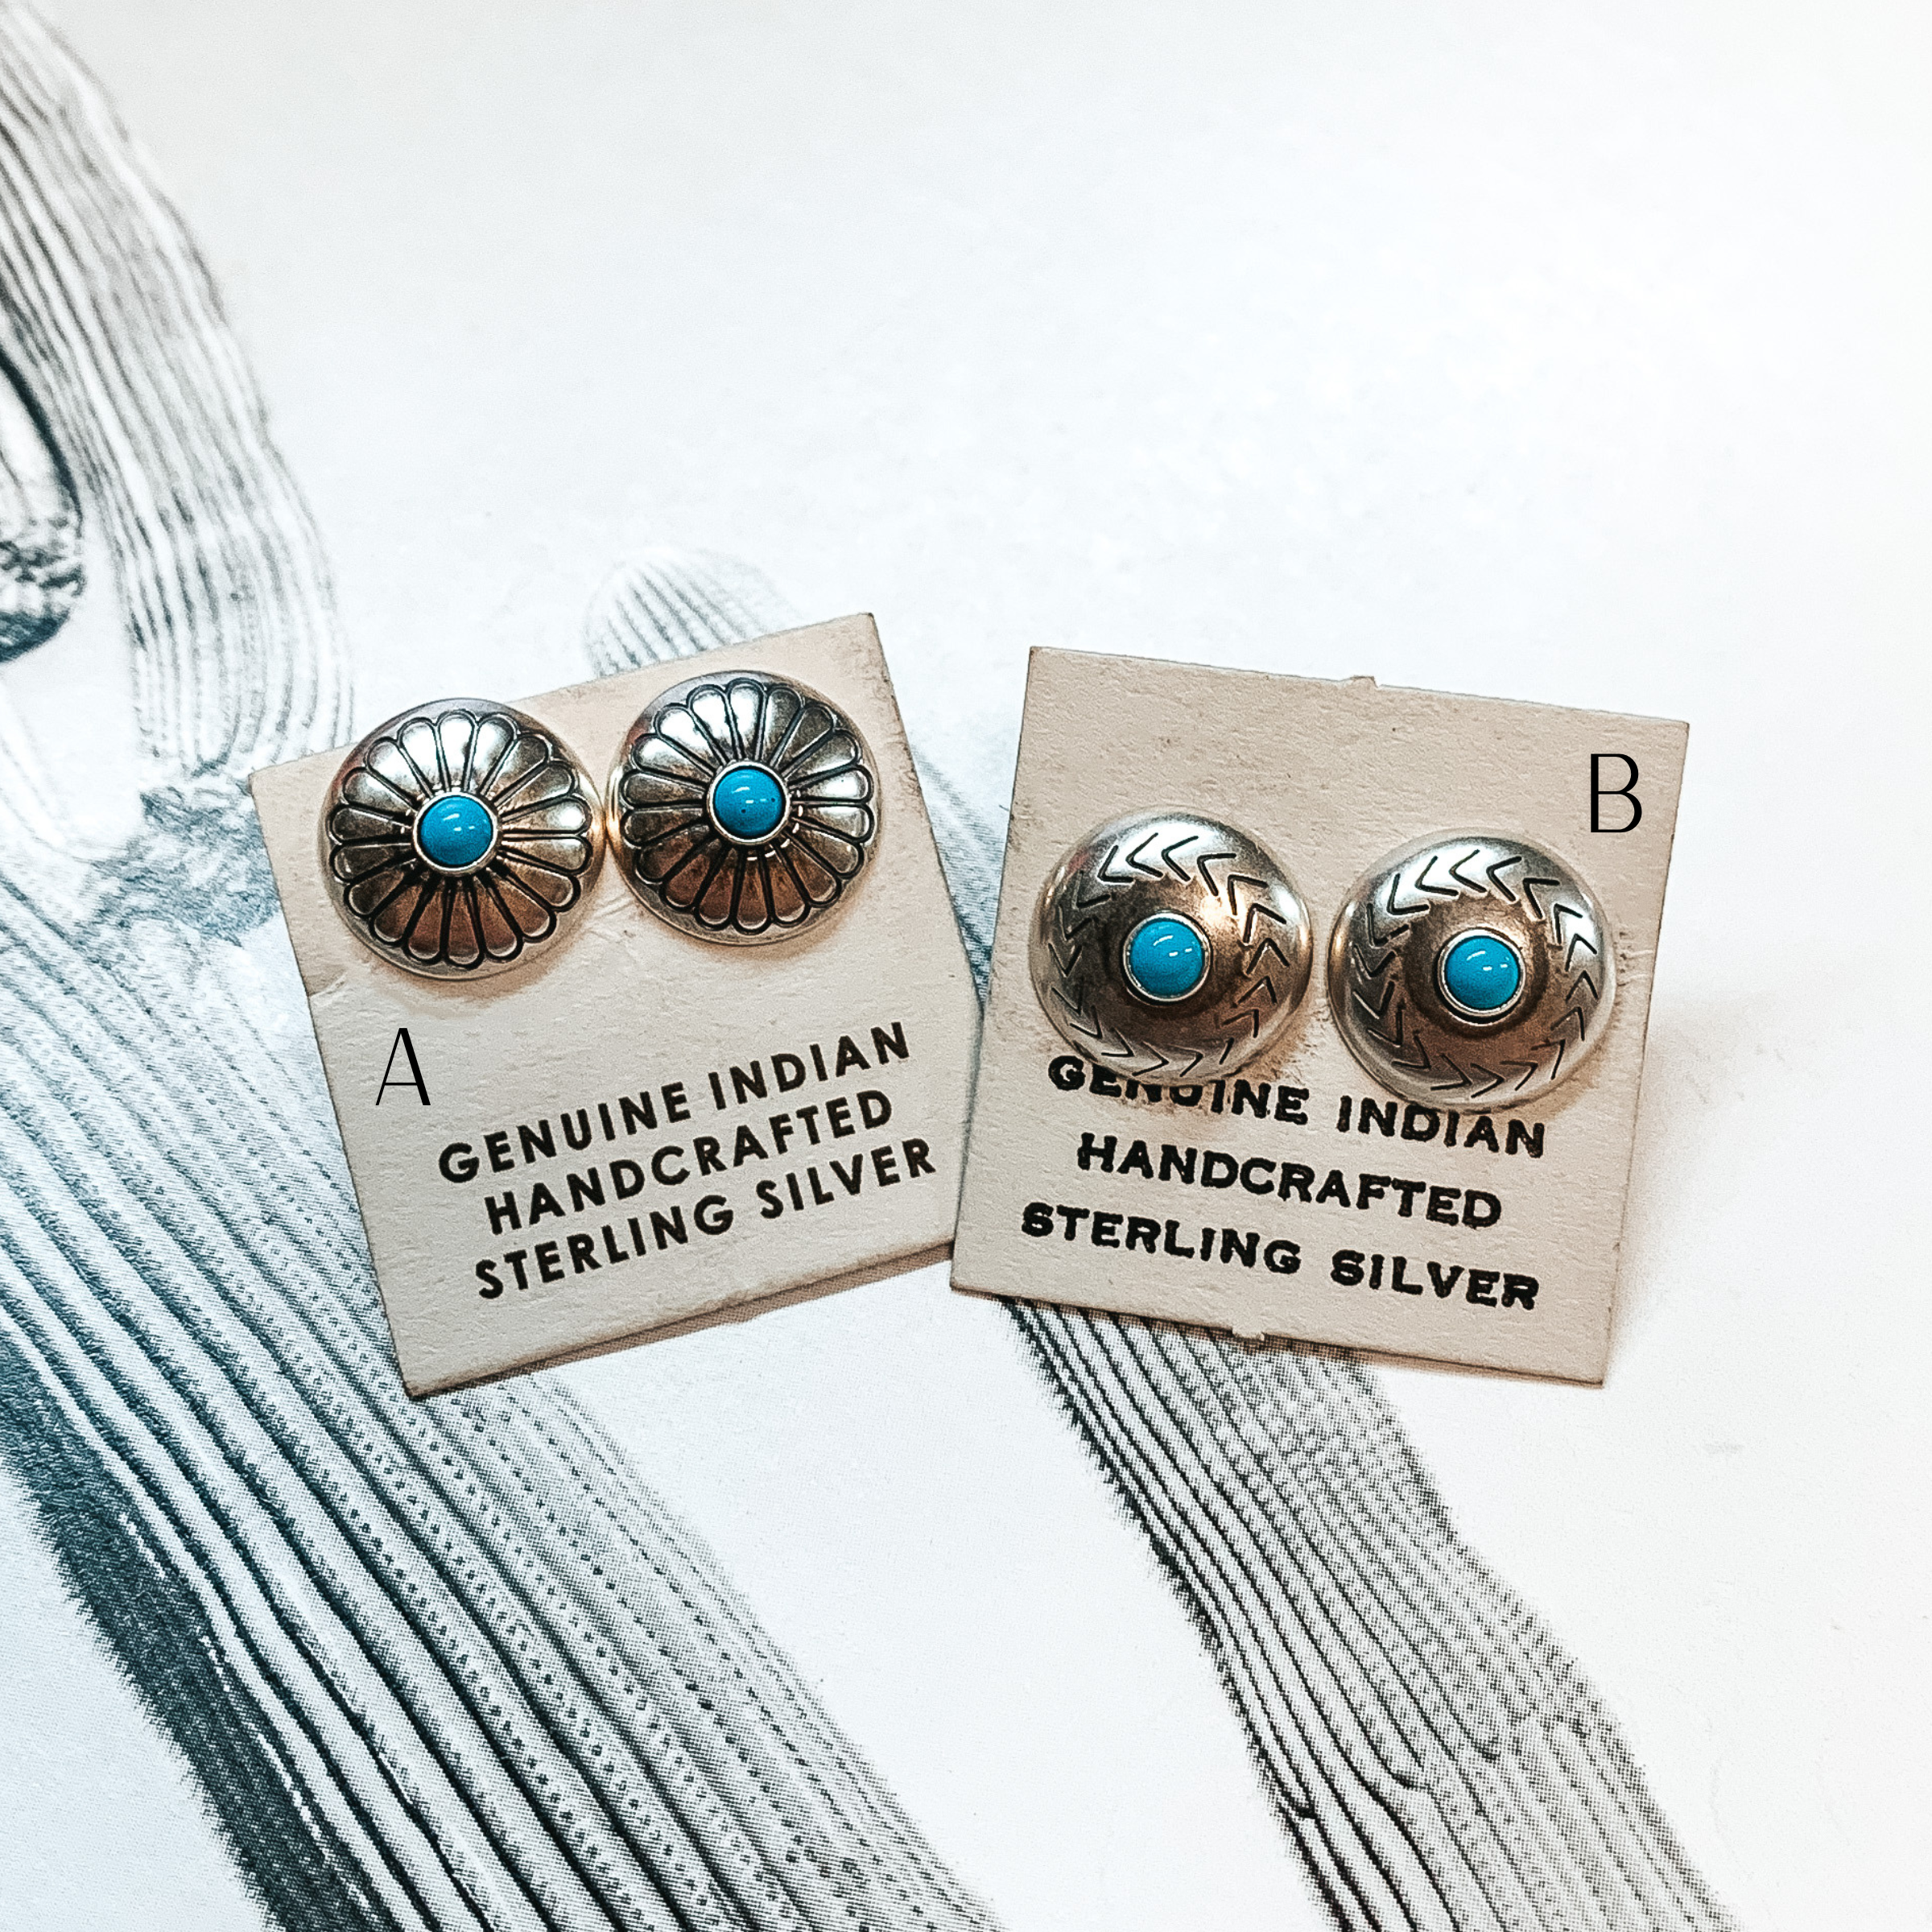 Linda Yazzie  |  Navajo Handmade Small Sterling Silver Engraved Concho Earrings with Kingman Turquoise Stones